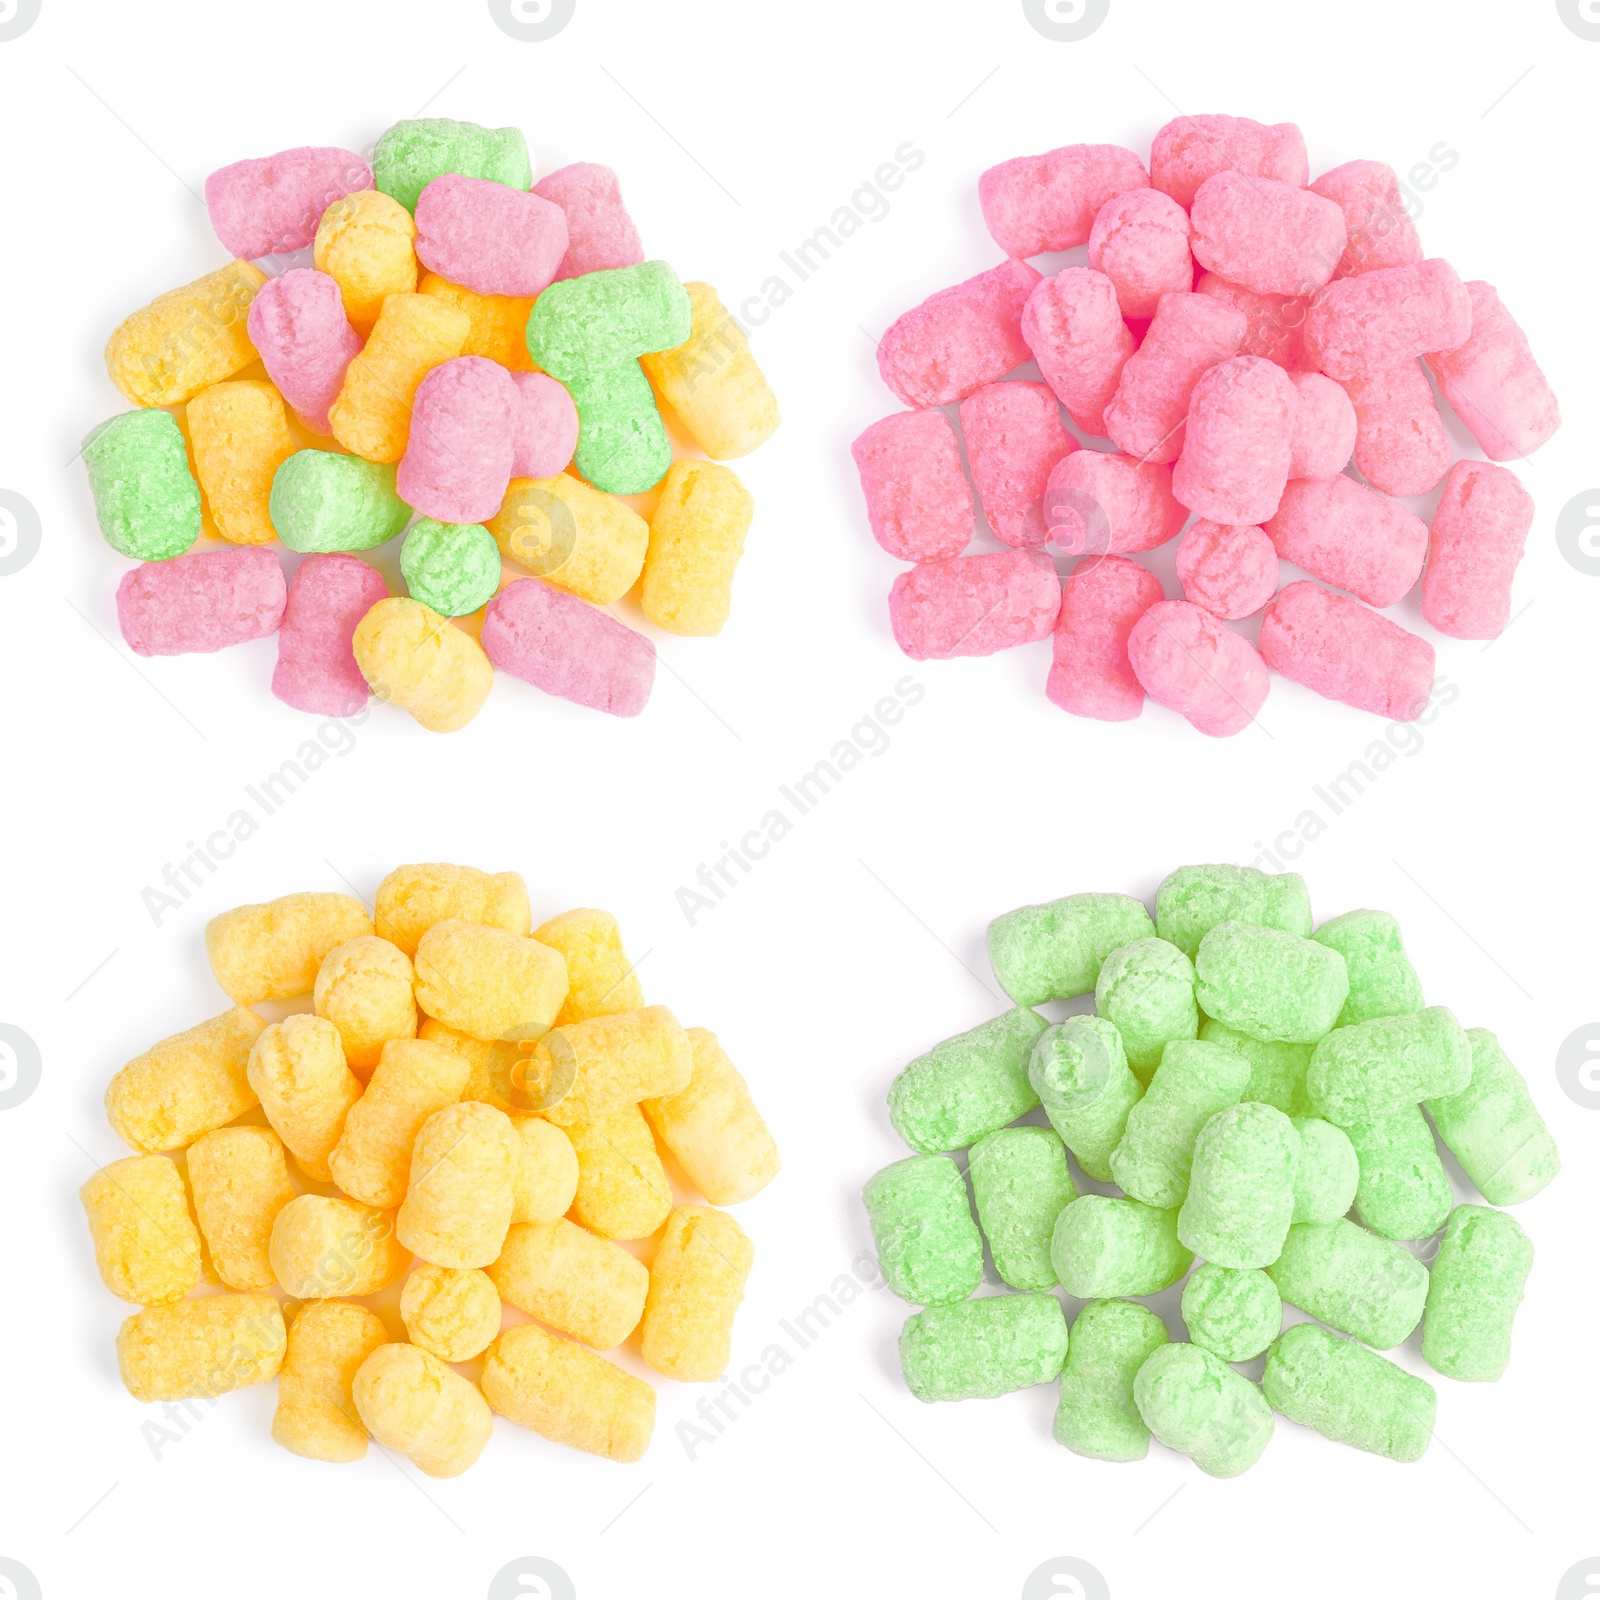 Image of Collage with piles of colorful corn puffs on white background, top view